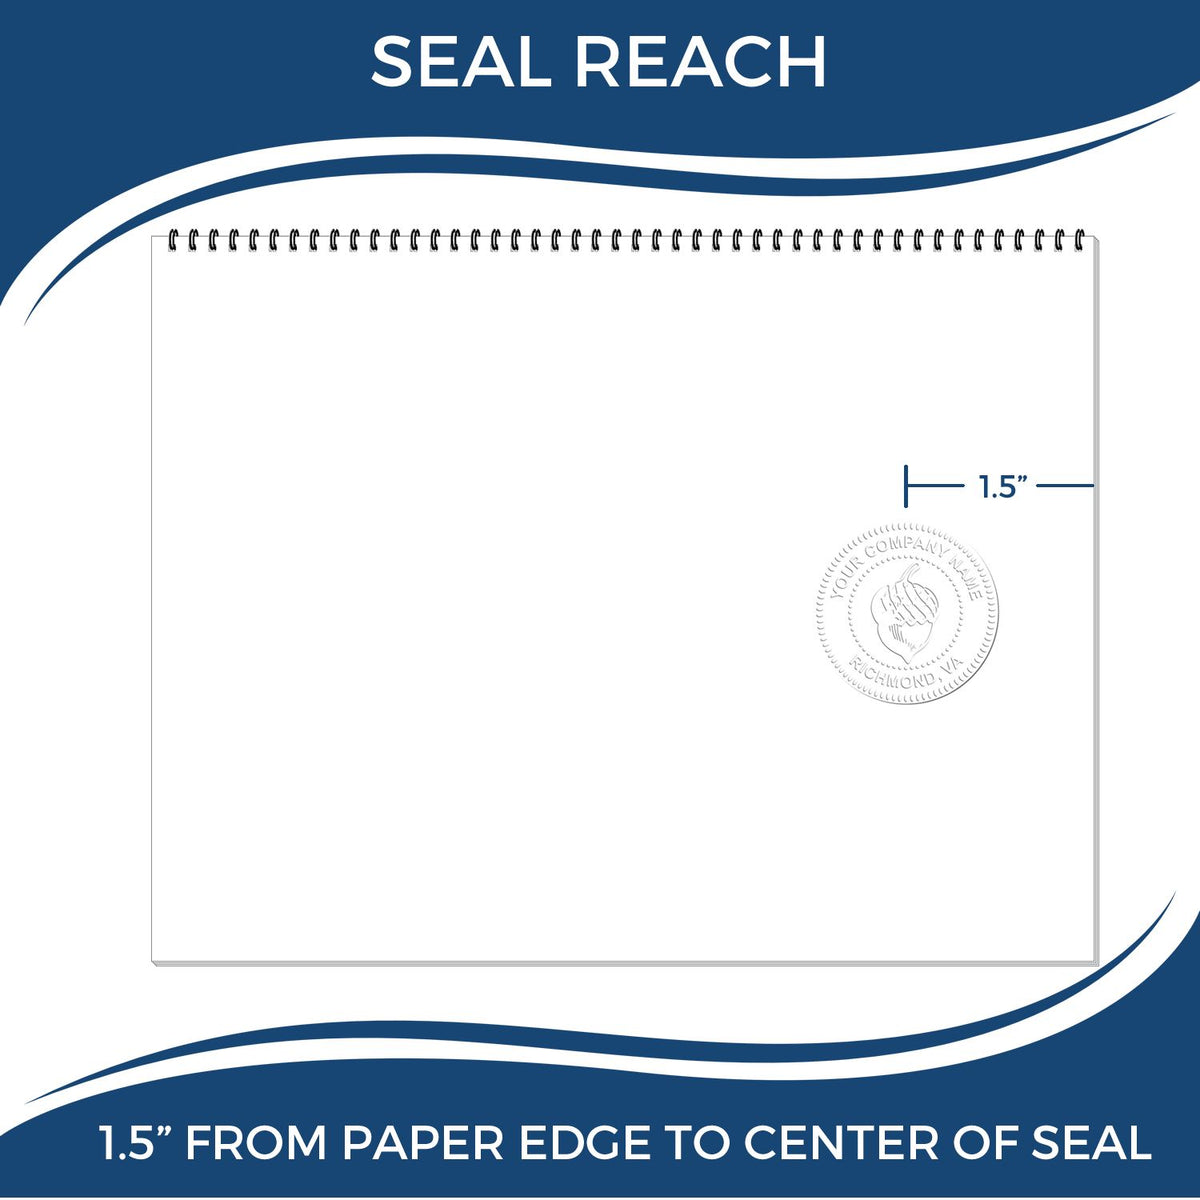 An infographic showing the seal reach which is represented by a ruler and a miniature seal image of the Hybrid Georgia Architect Seal